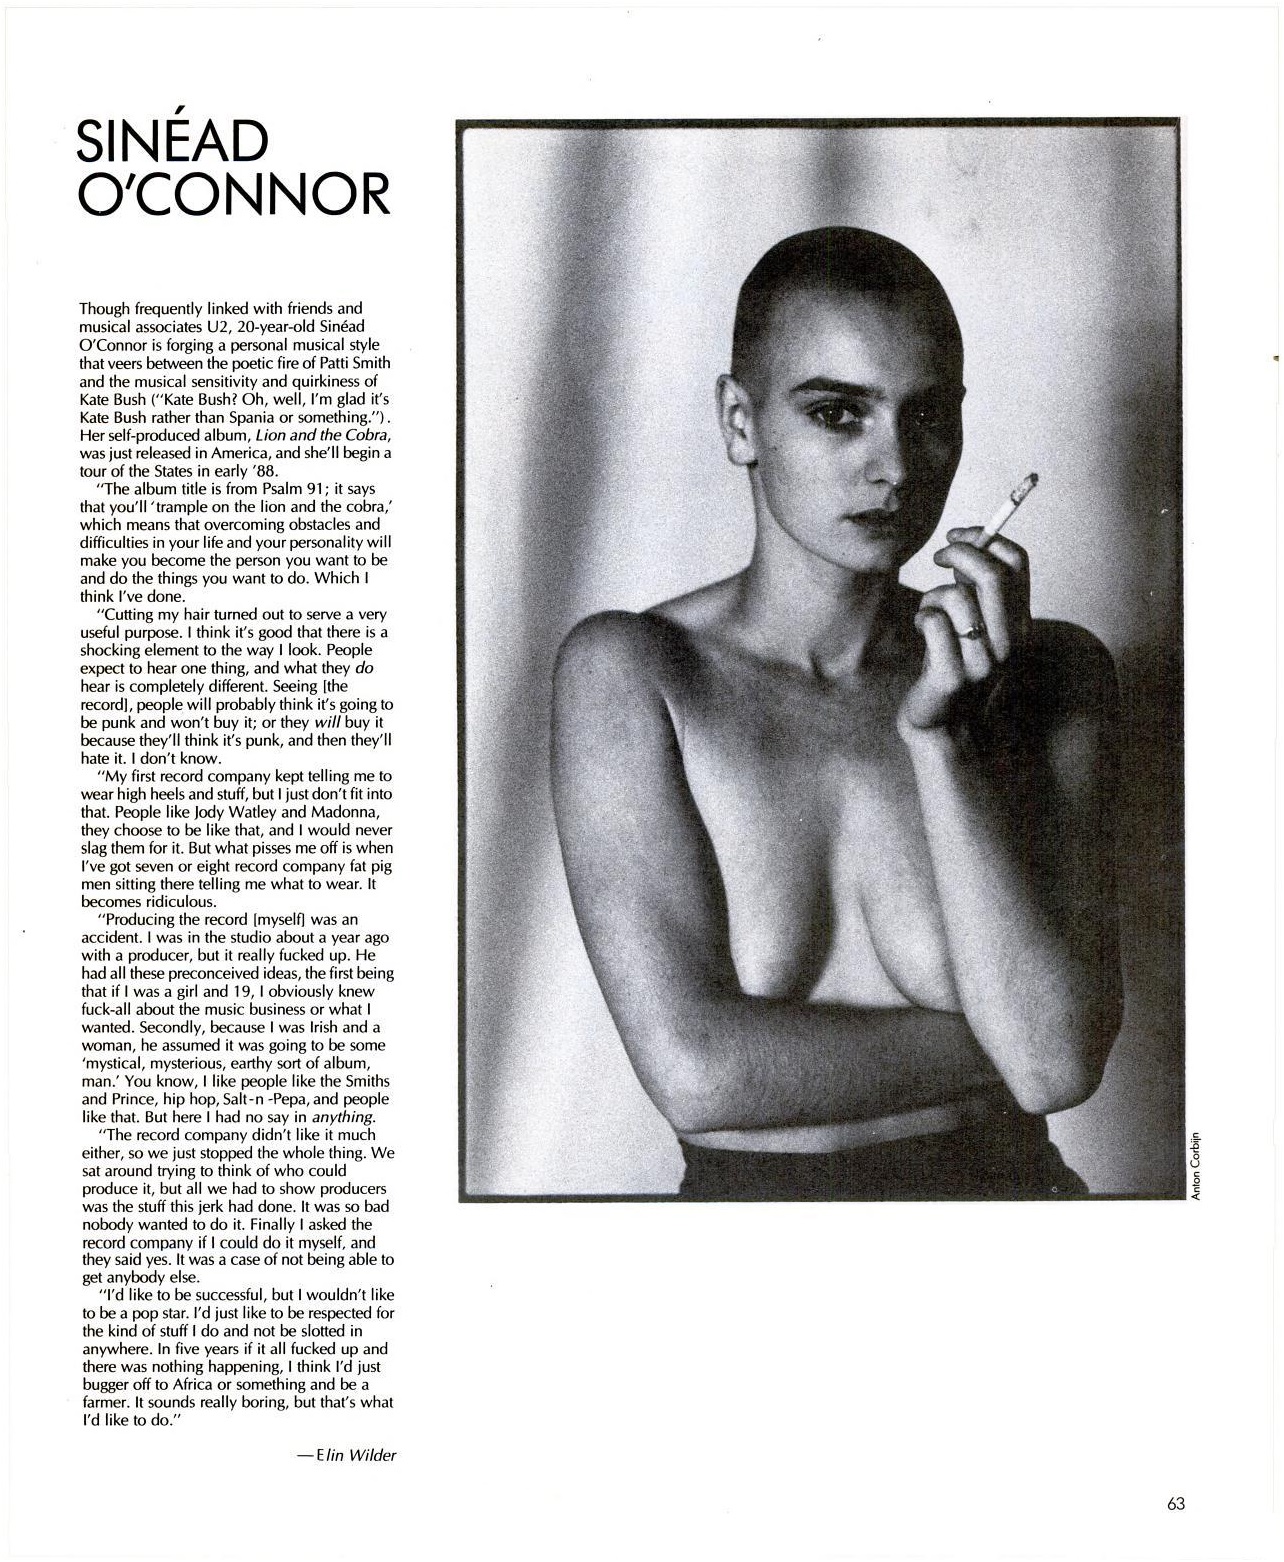 Sinead o'connor naked